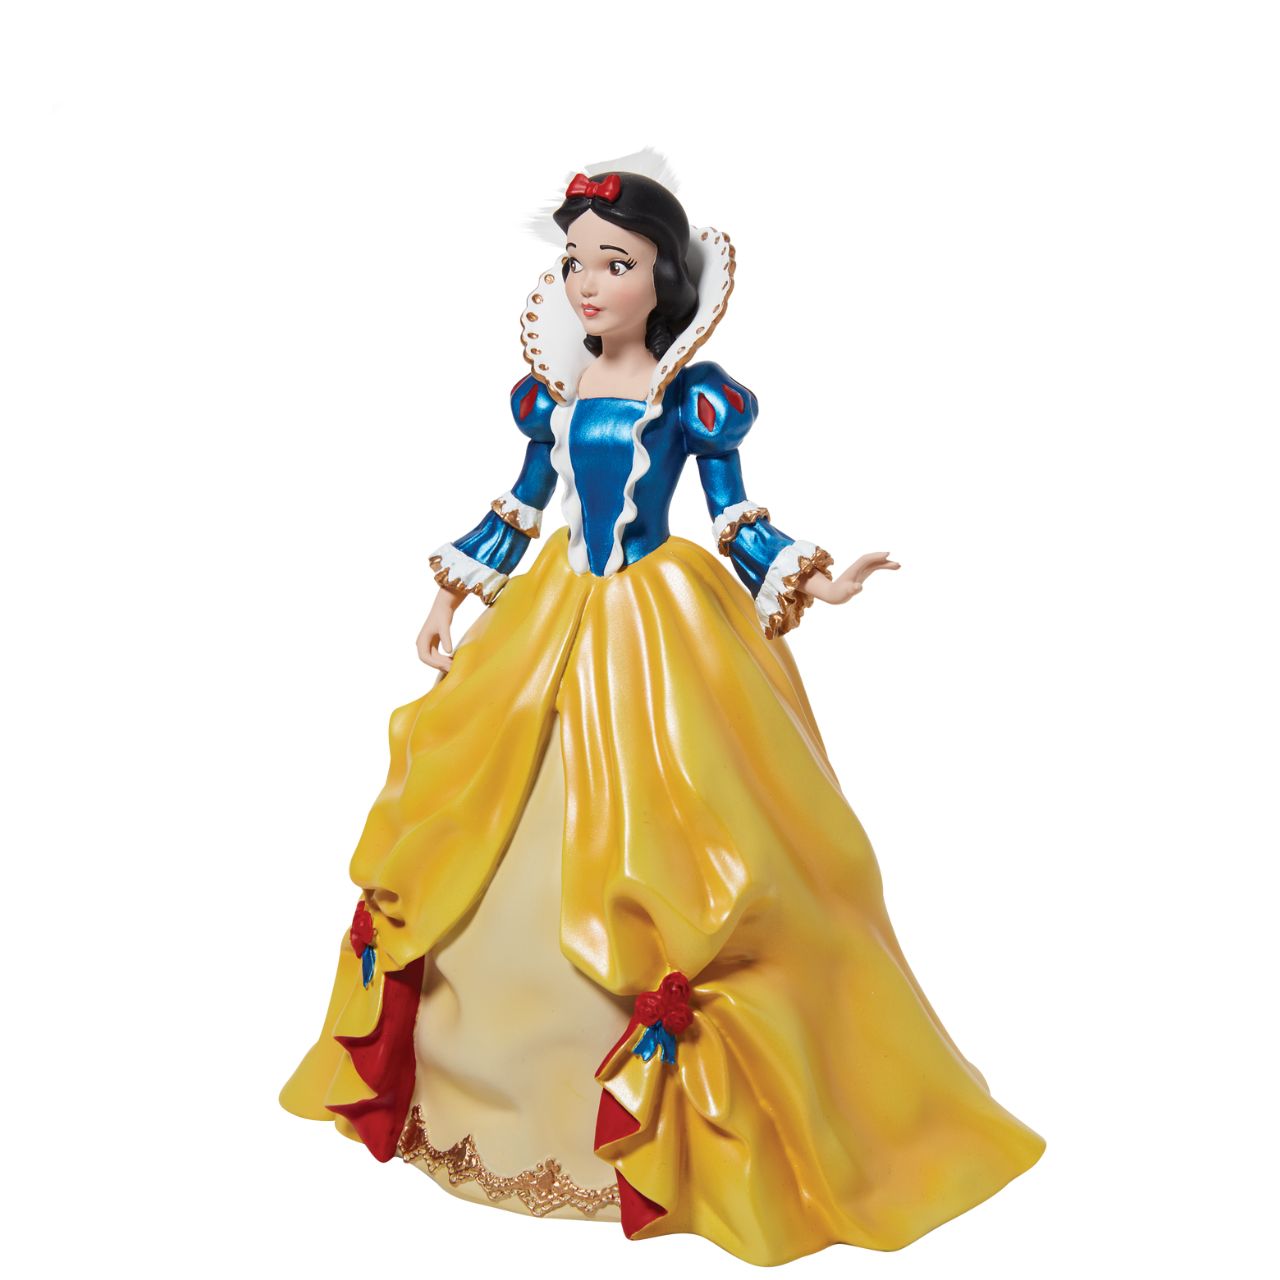 Disney Snow White Rococo Figurine  Snow White Rococo Figurine. The Snow White figurine is made from cast stone. Each piece is hand painted and slight colour variations are to be expected which makes each piece unique. Supplied in branded gift box. Not a toy or children's product. Intended for adults only.